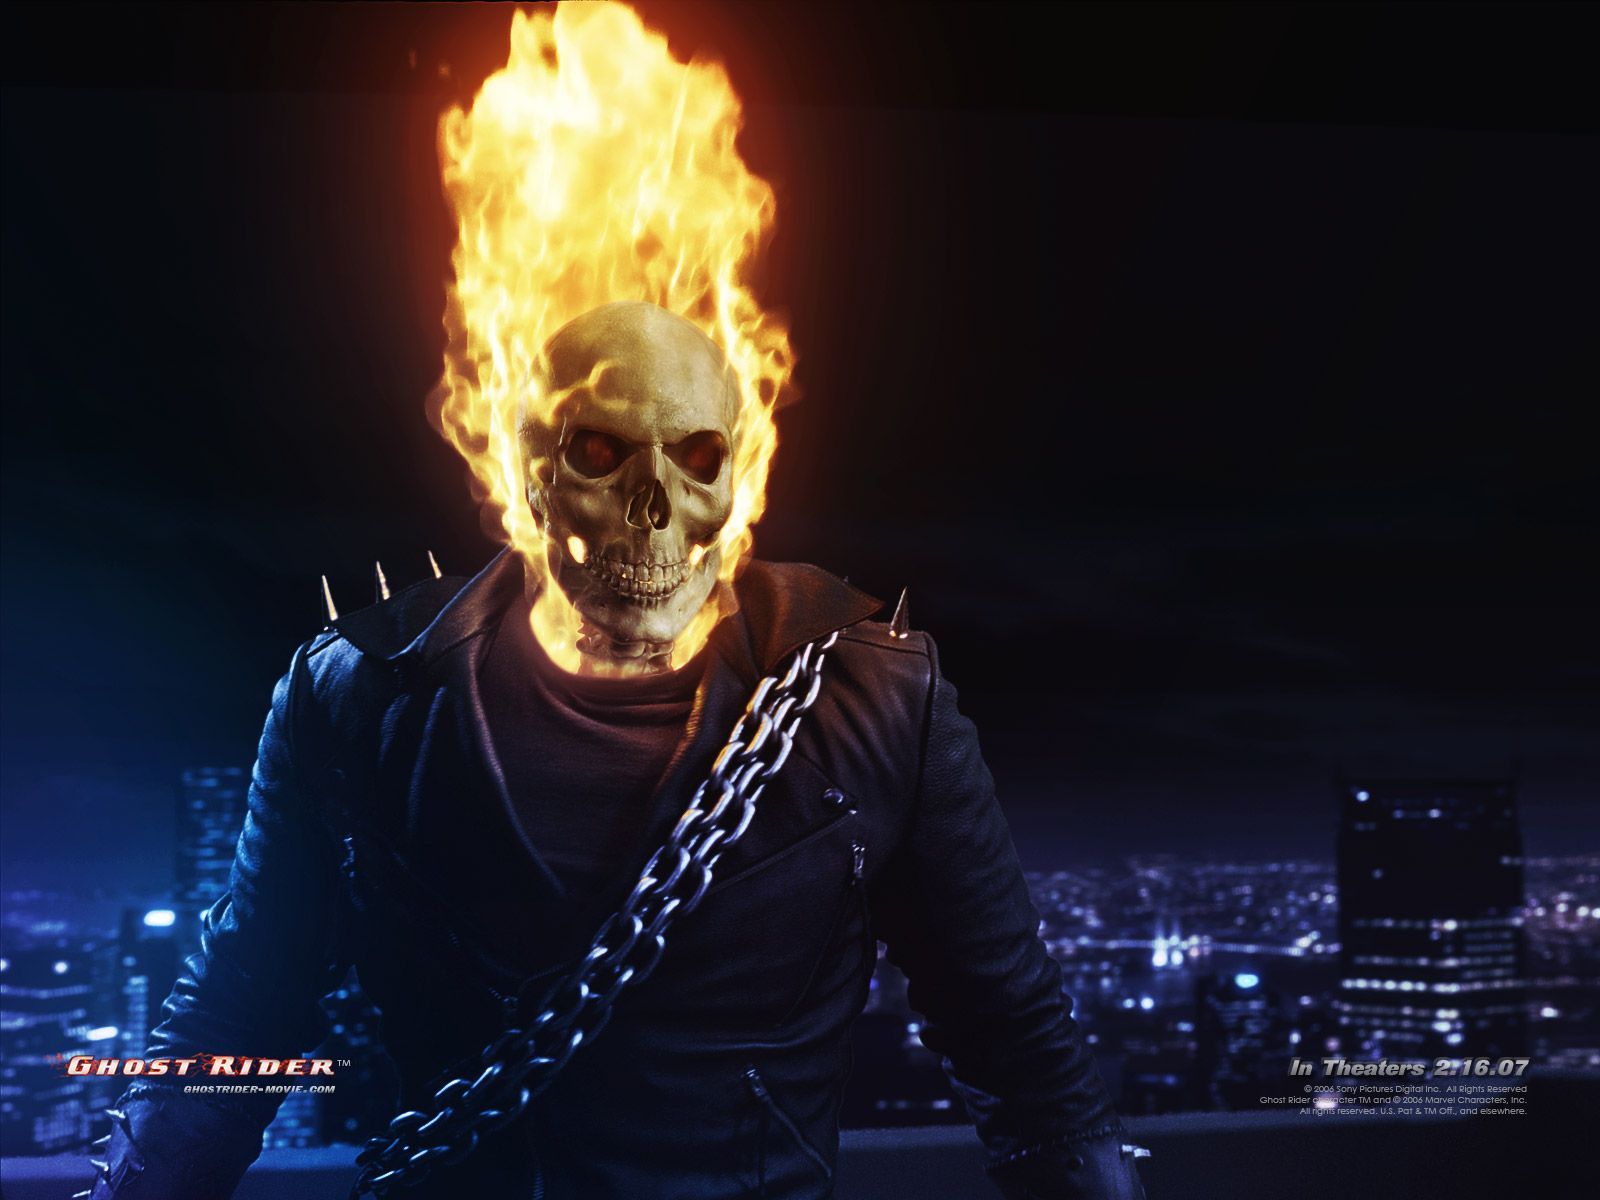 ghost rider photos download Wallpapers - Free ghost rider photos ...